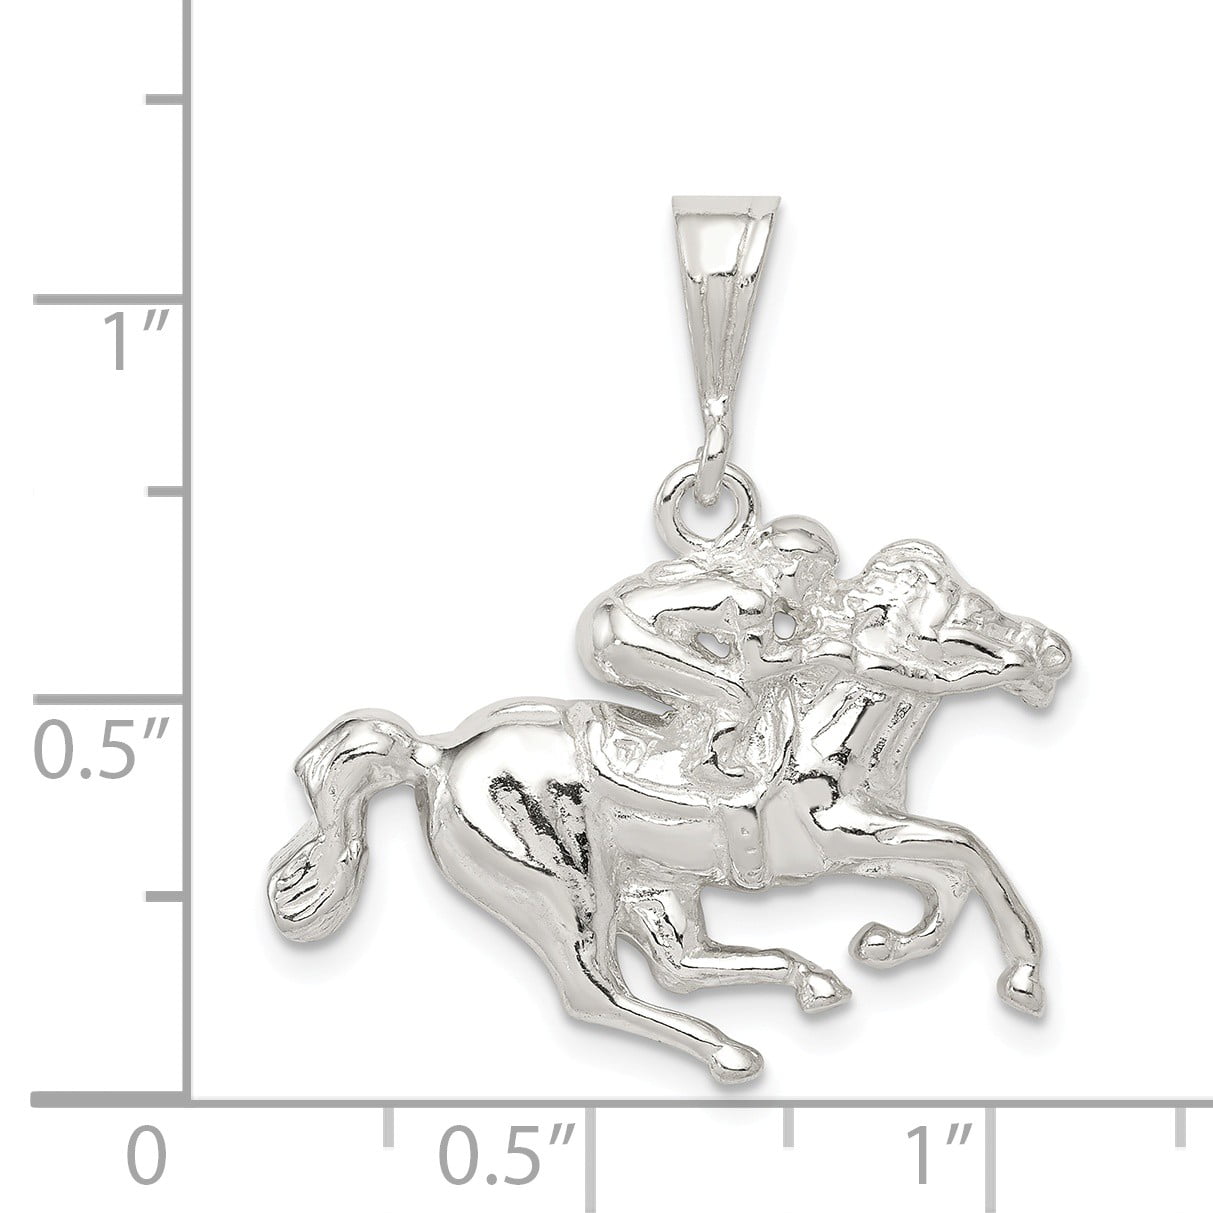 Bonyak Jewelry Sterling Silver Antiqued Horseshoe with Horse Head Charm